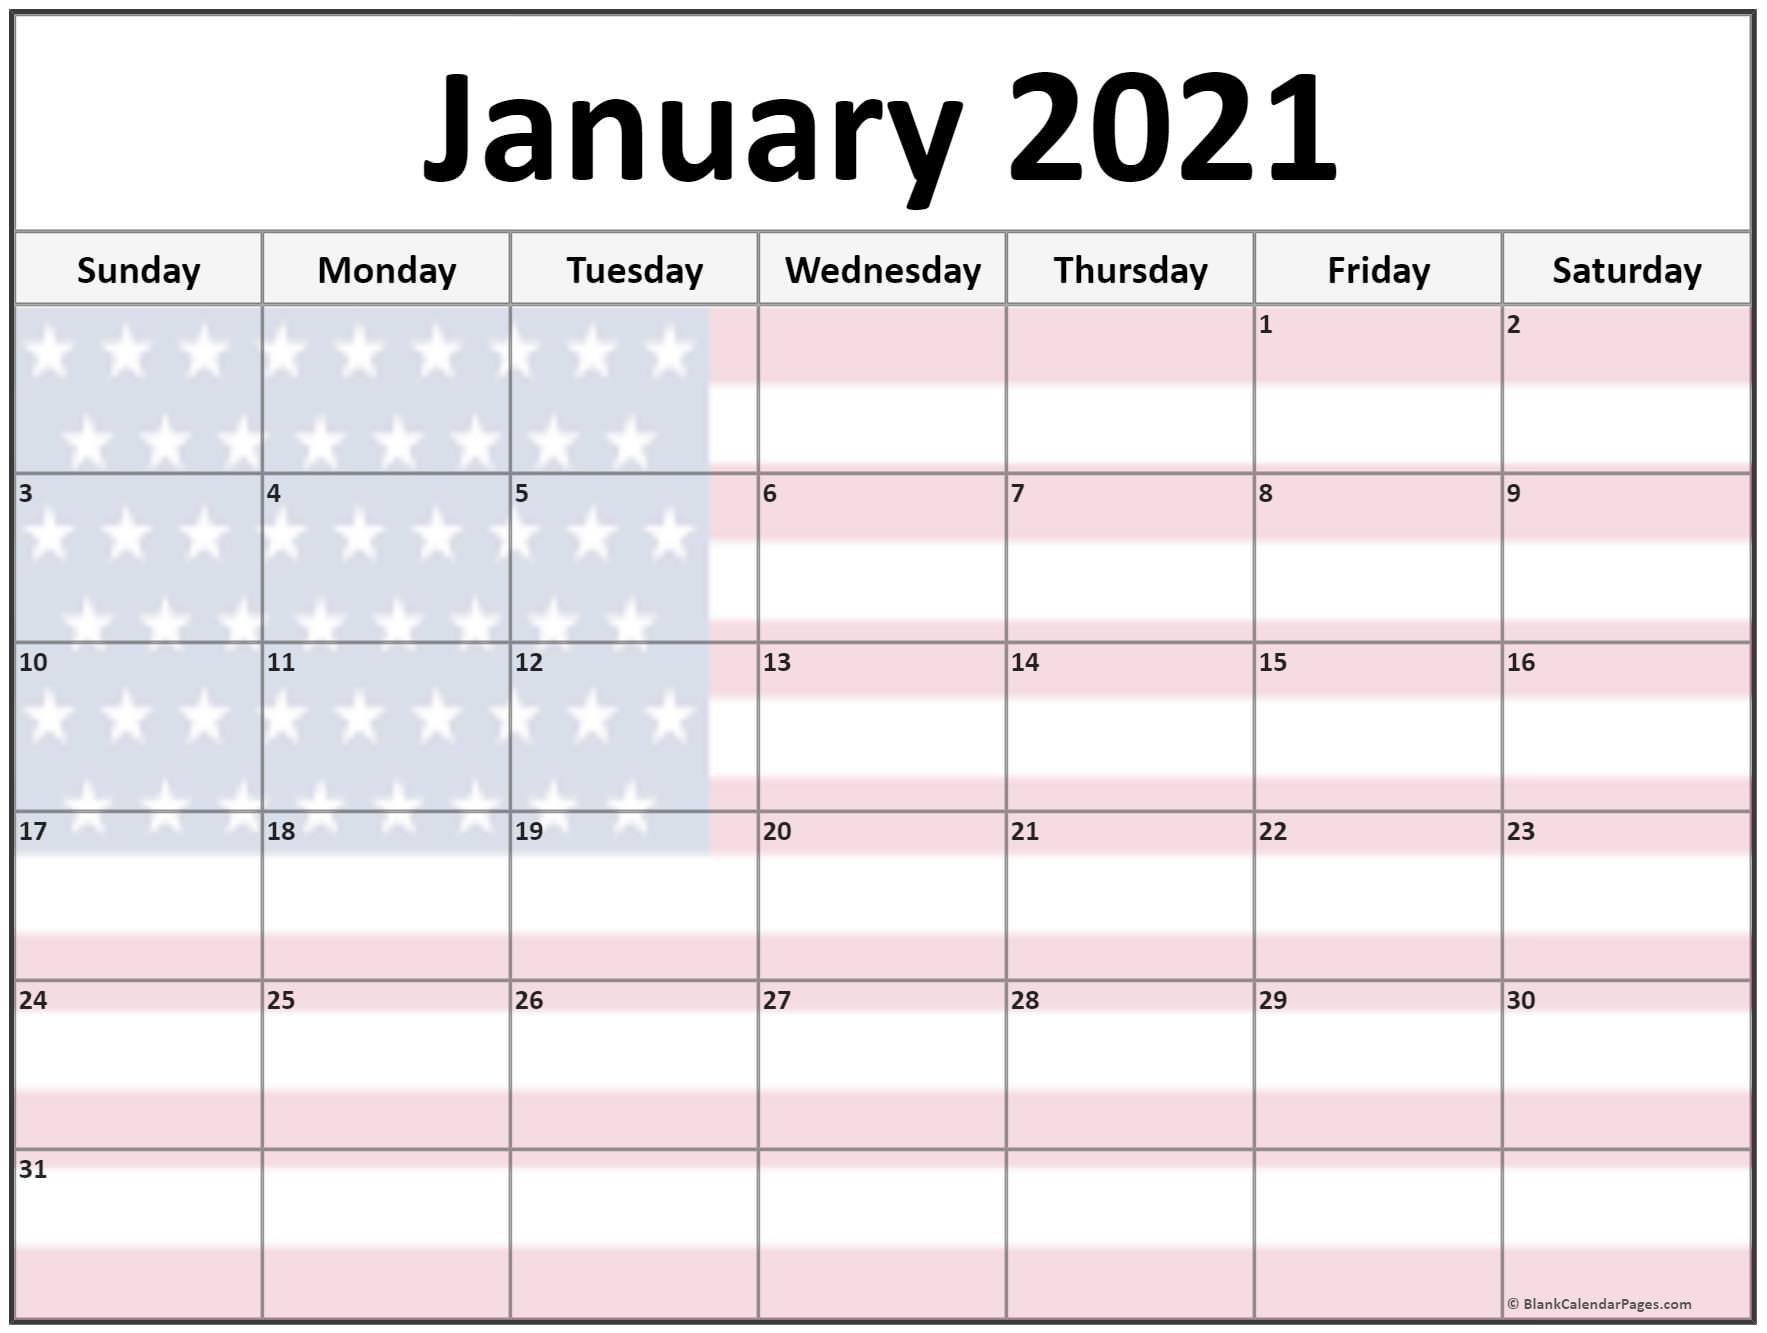 Collection Of January 2021 Photo Calendars With Image Filters